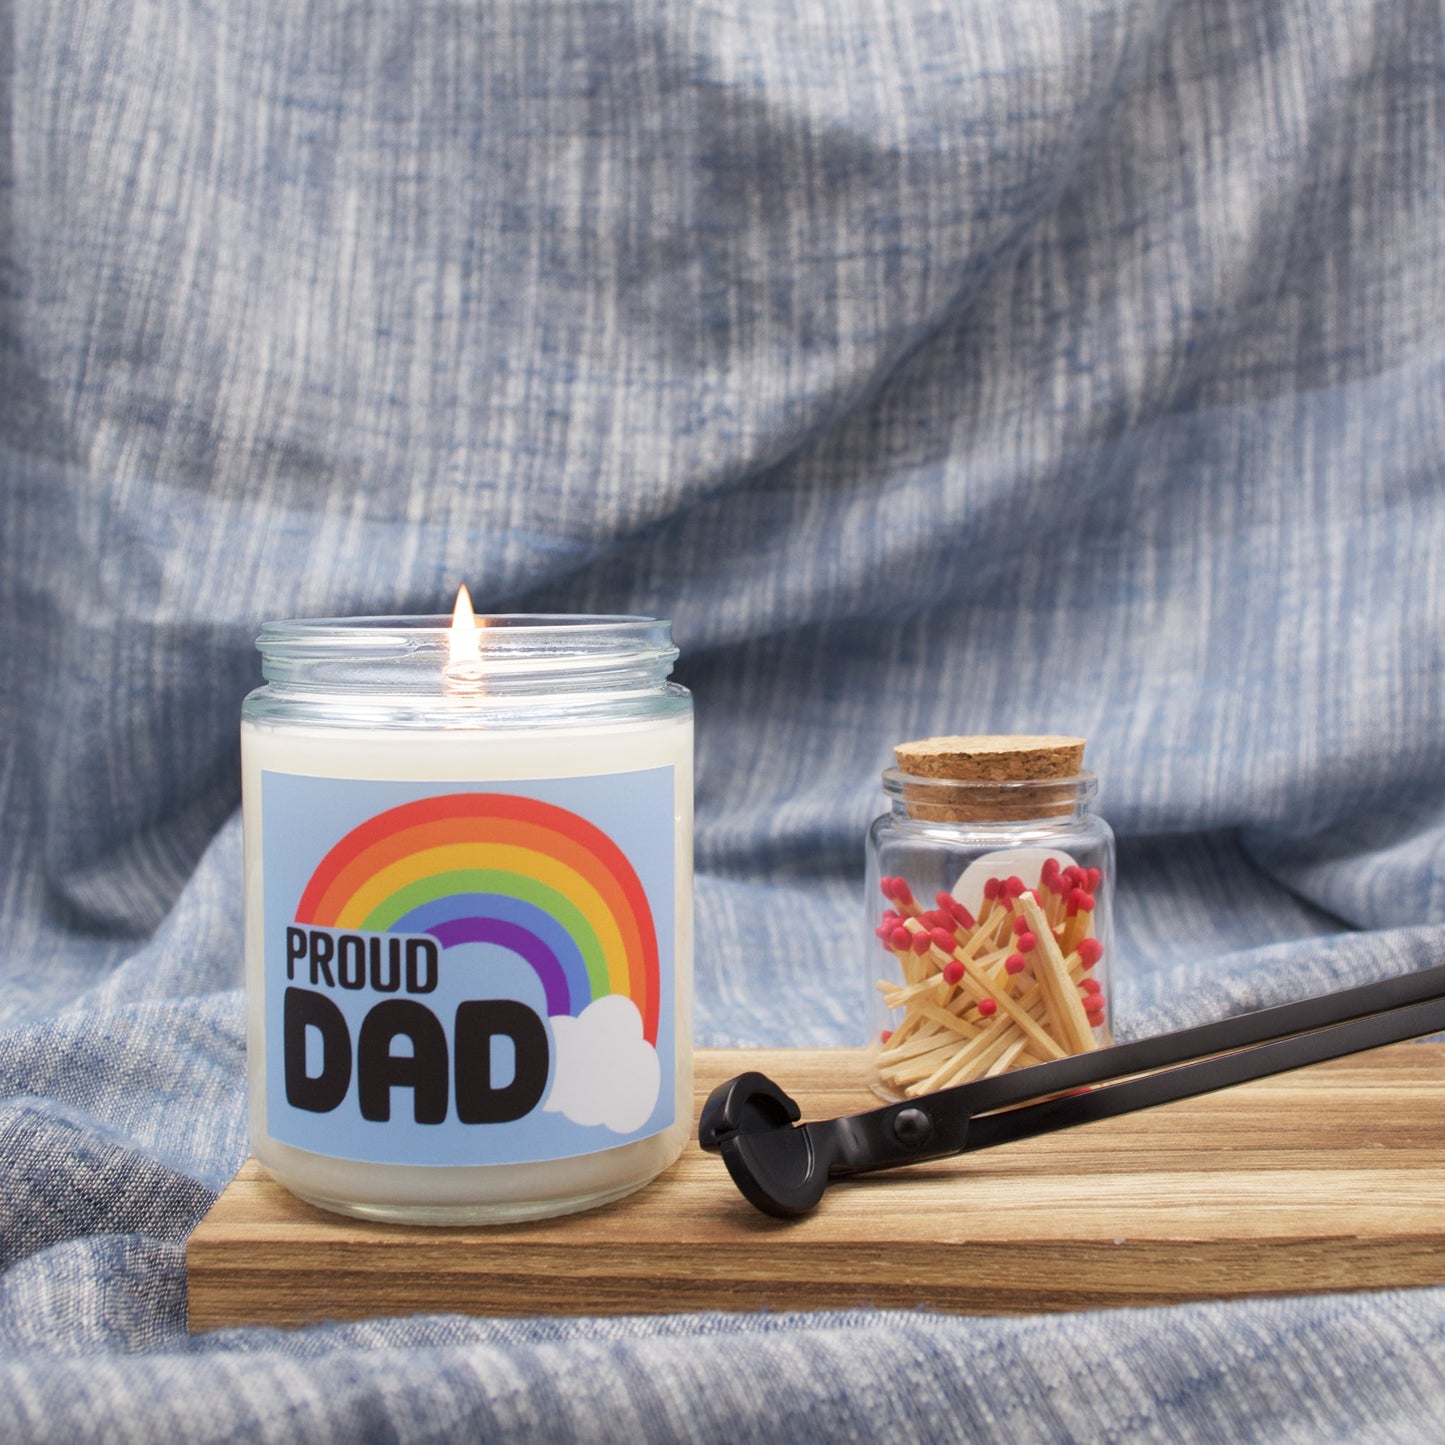 Proud Dad - Scented Candle